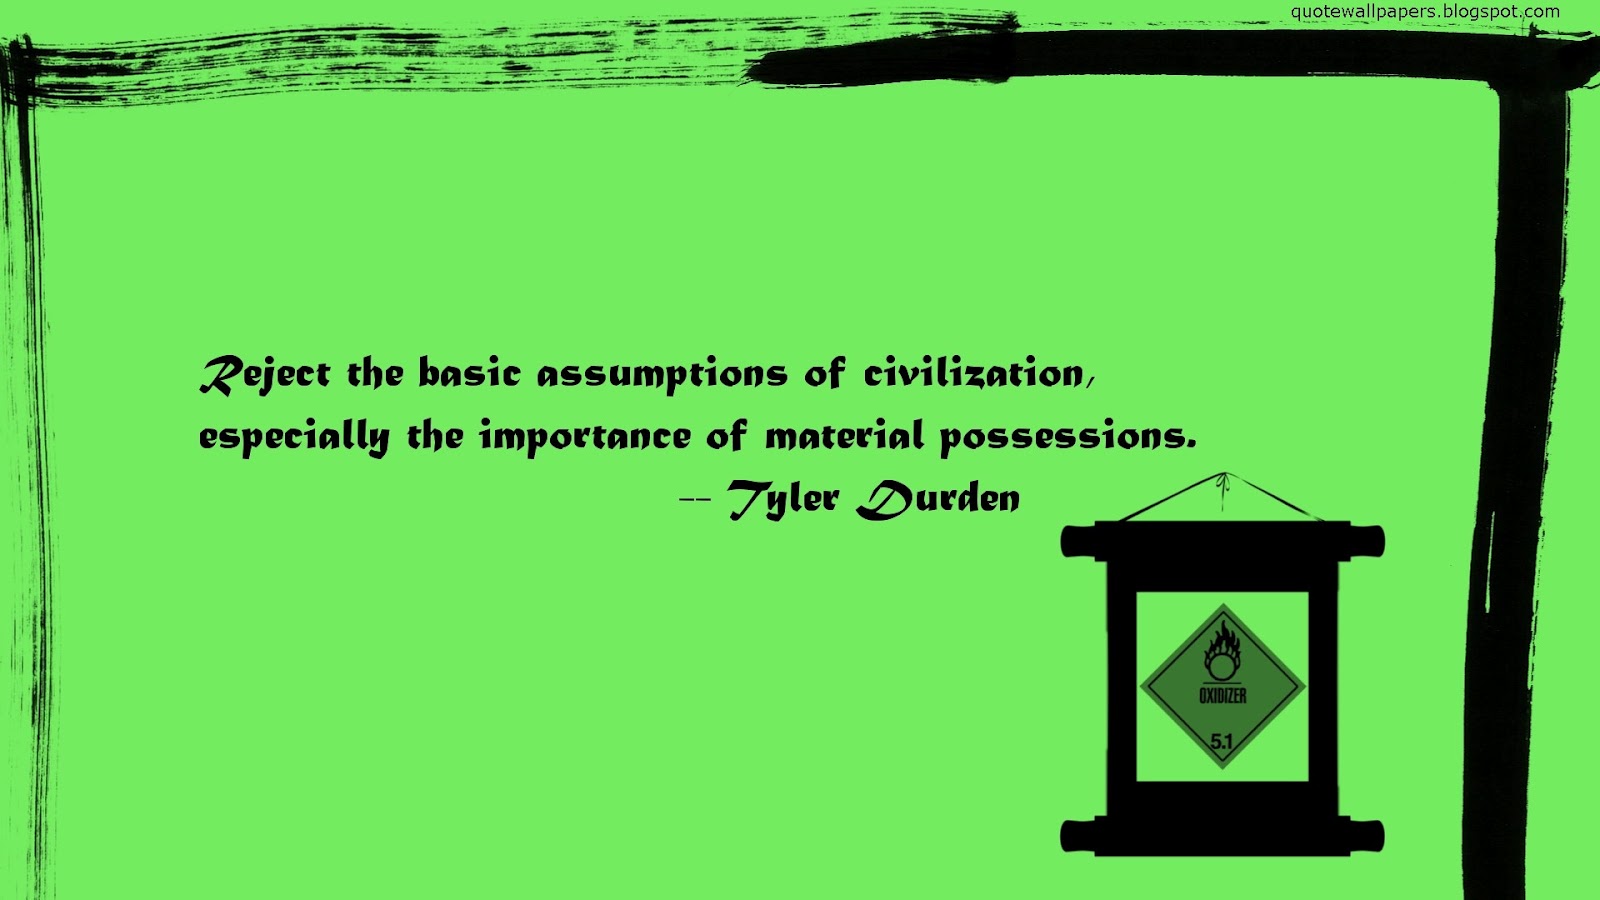 Reject the basic assumptions of civilization especially the importance of material possessions. Tyler Durden